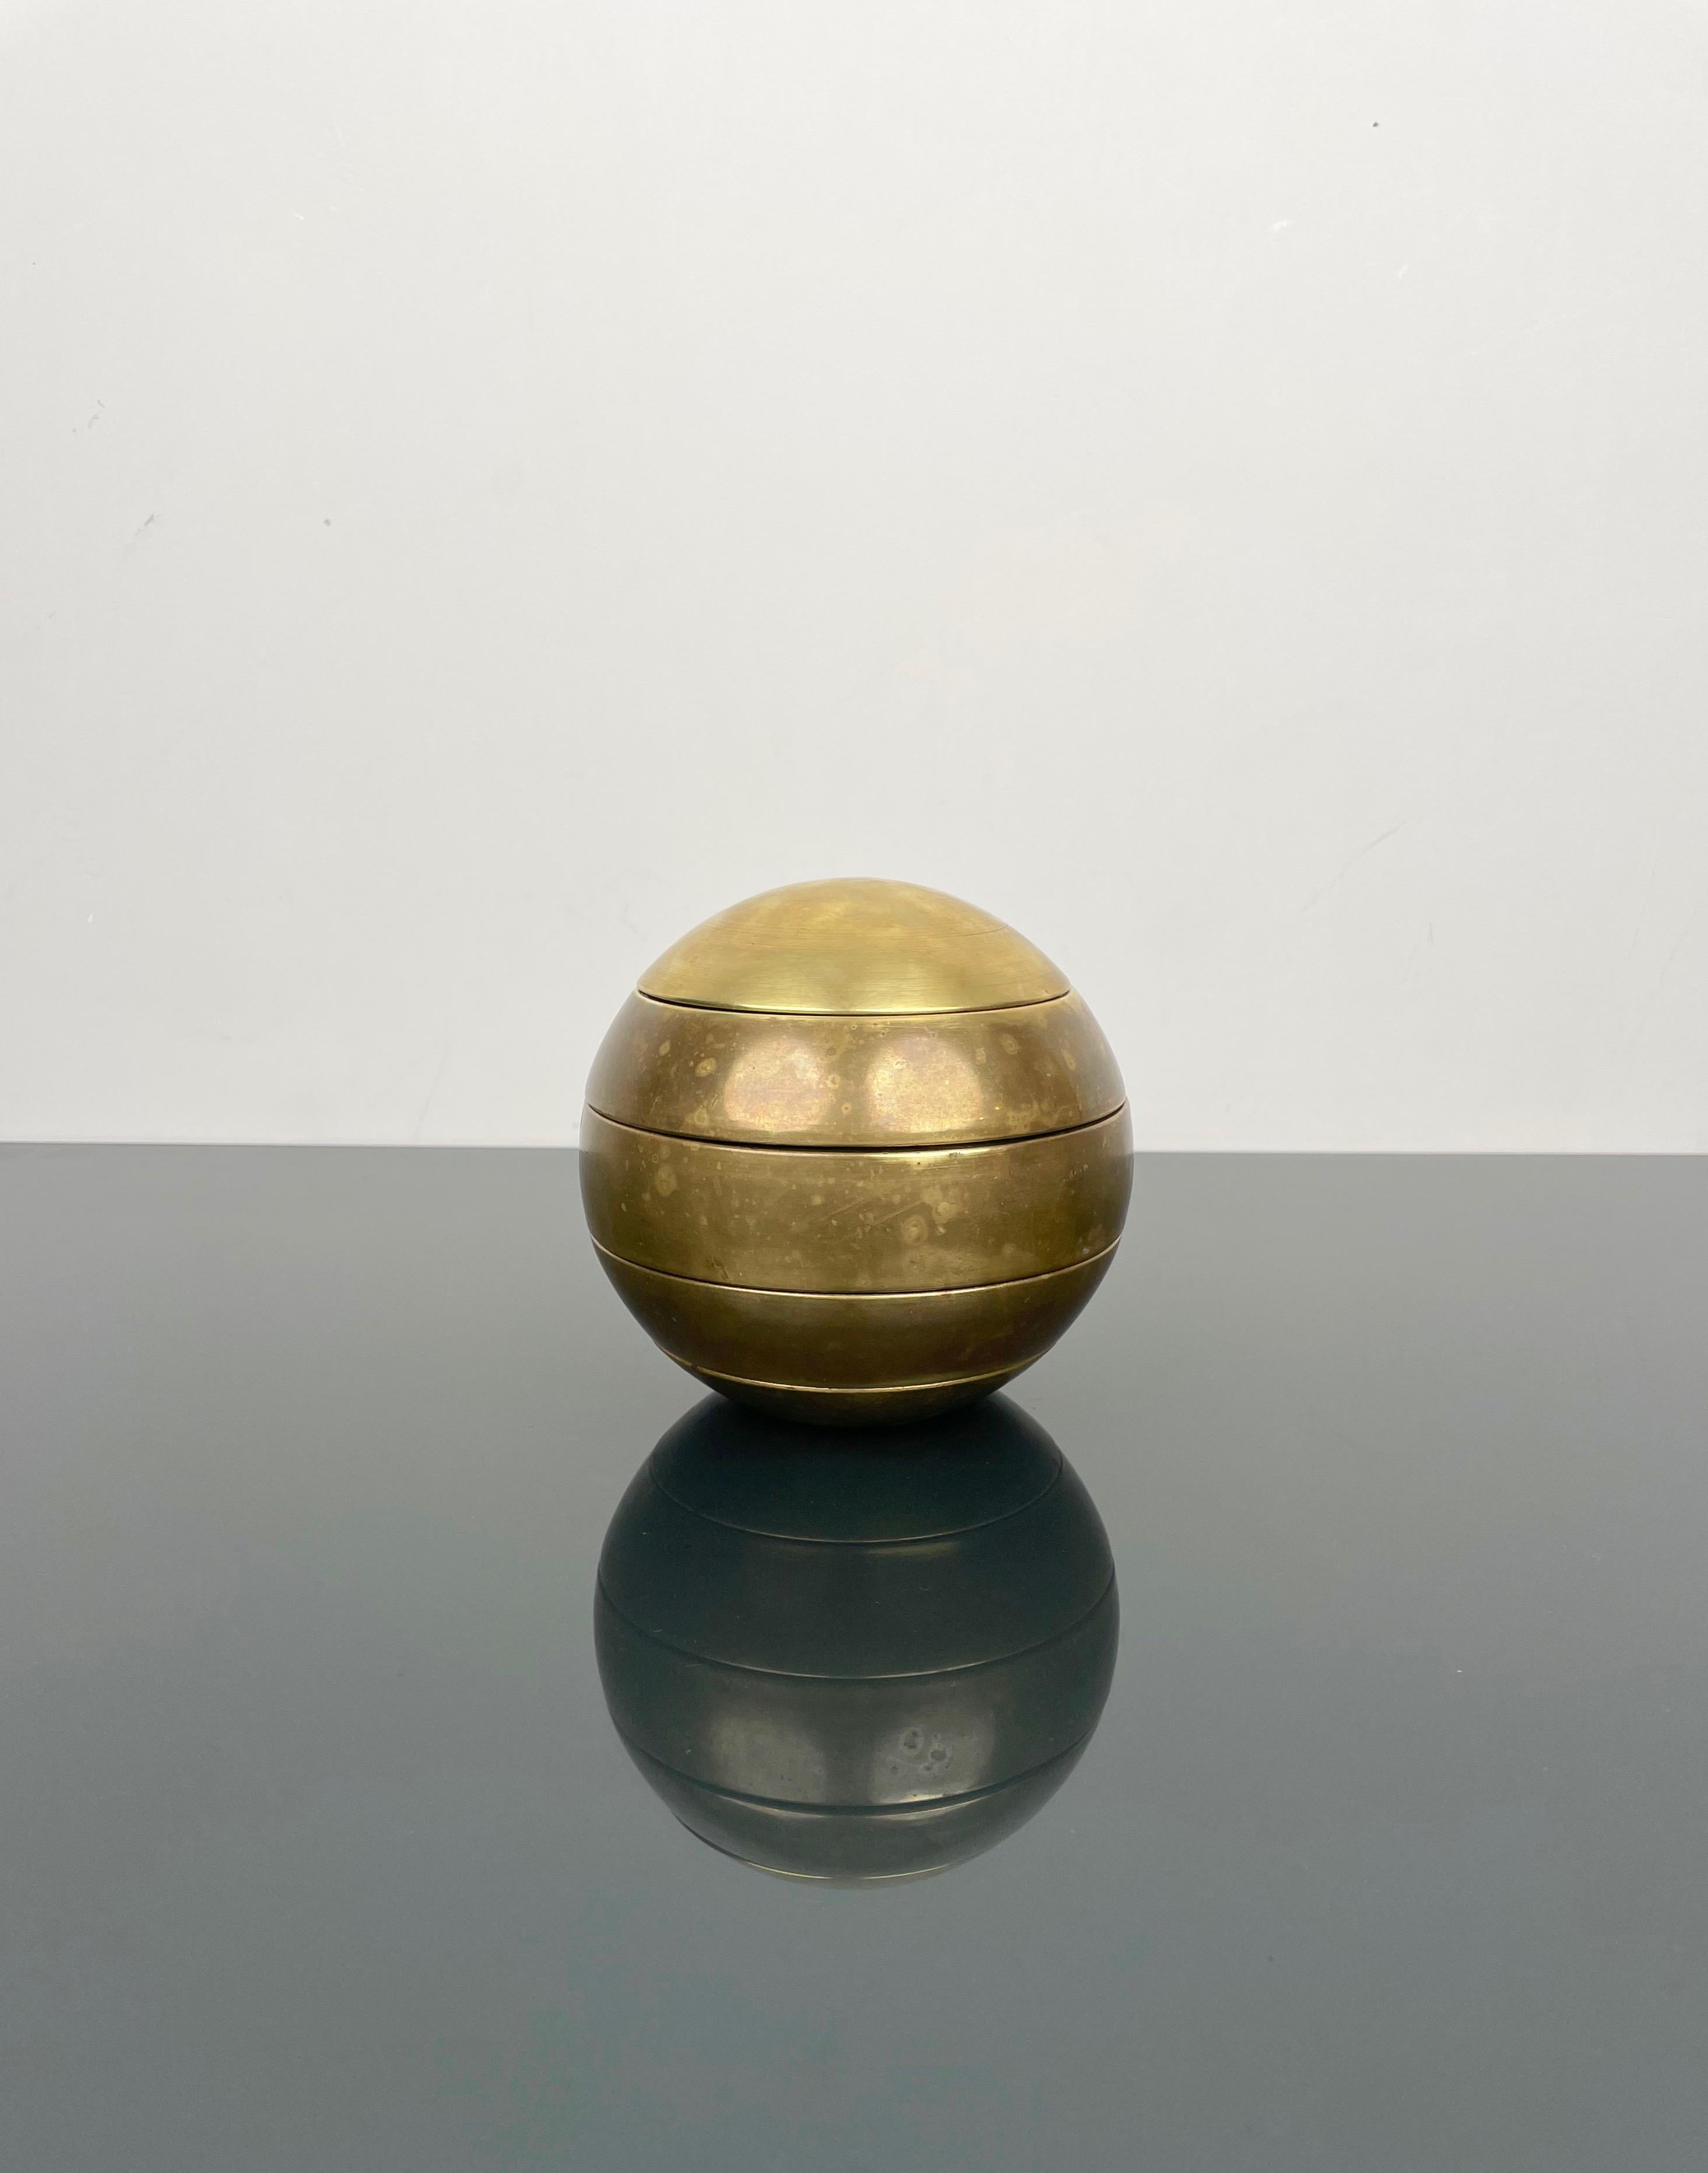 Globe shaped stackable ashtrays or bowls entirely in brass attributed to the Italian designer Tommaso Barbi. 

Made in Italy in the 1970s.

The brass has a nice patina (on request and at no cost it can be polished).